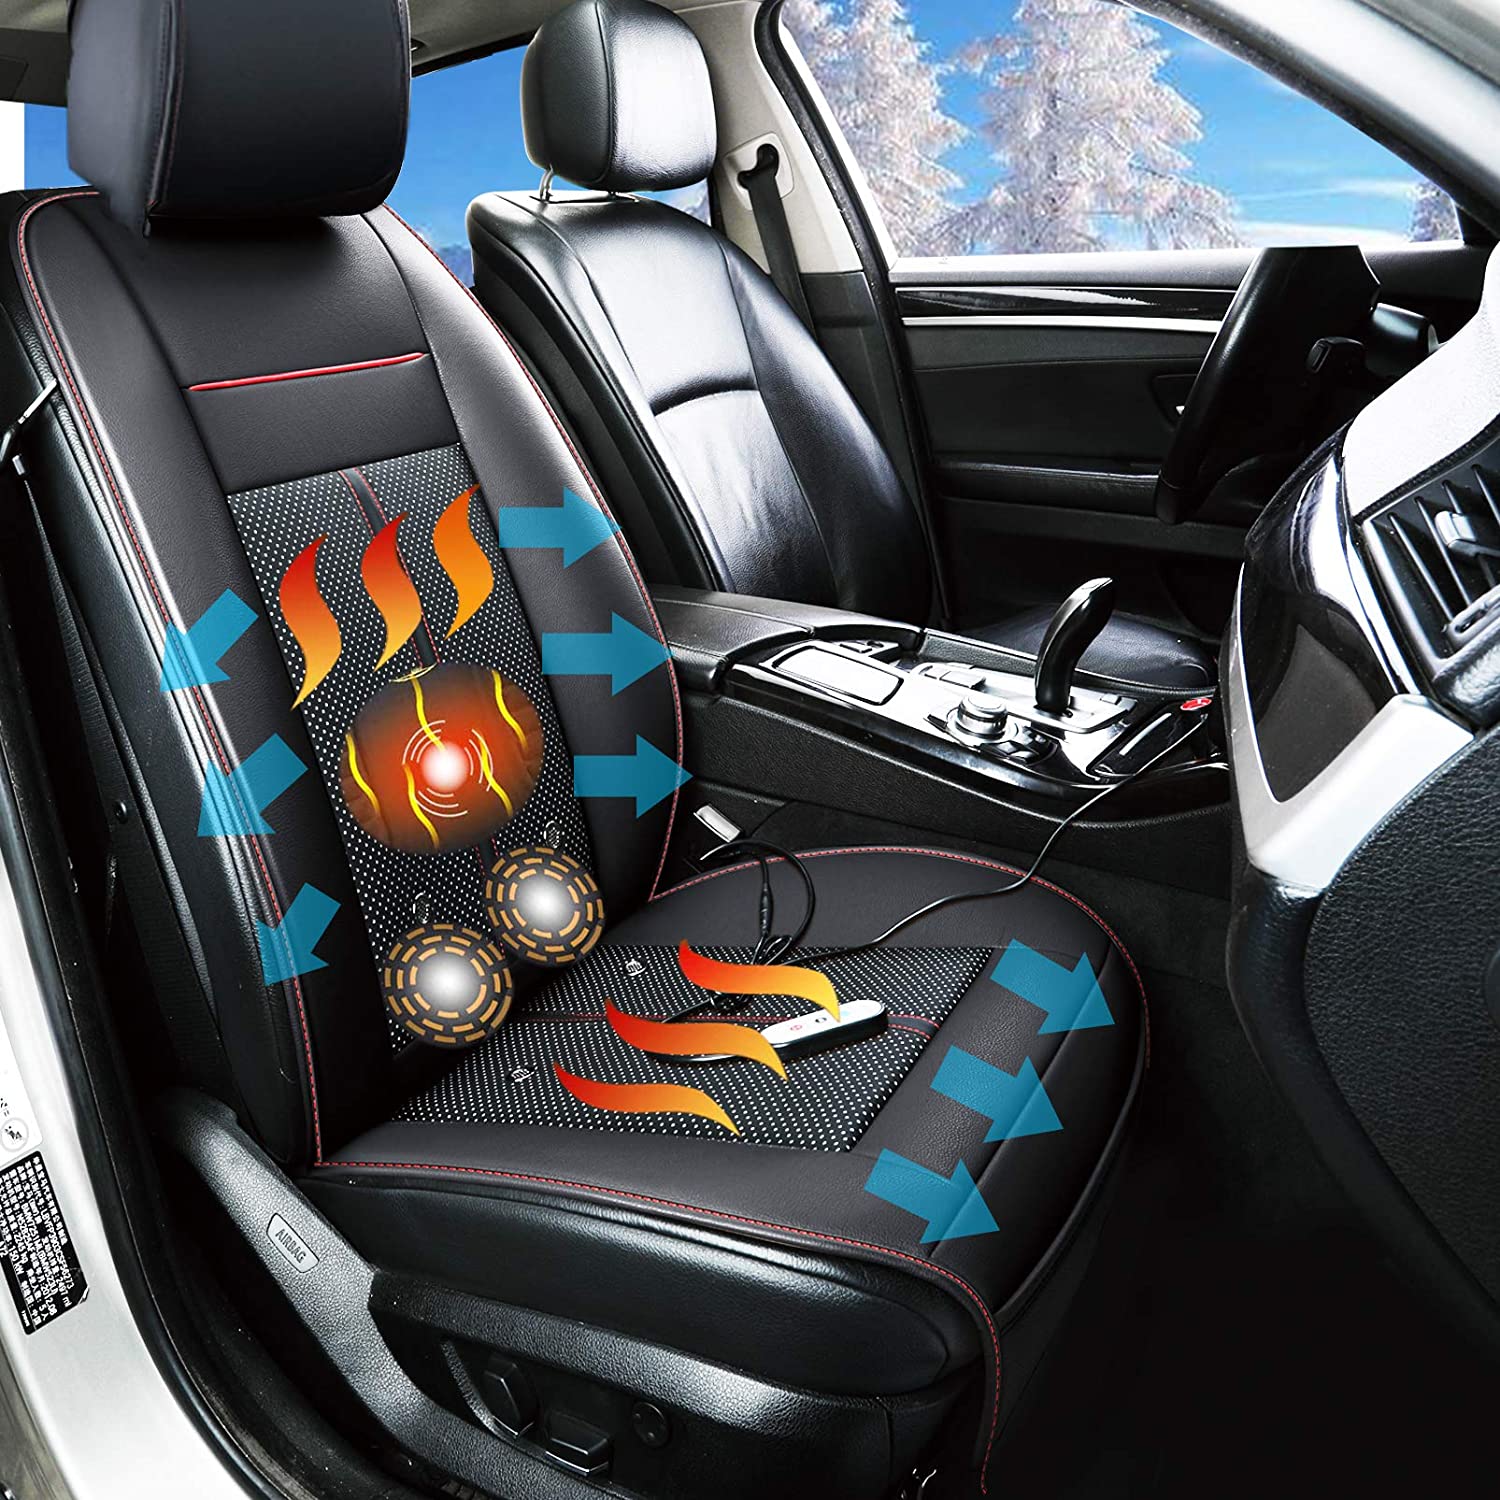 Drive Seat Cushion Car Cushion Chair Seat Pads Breathable Cooling